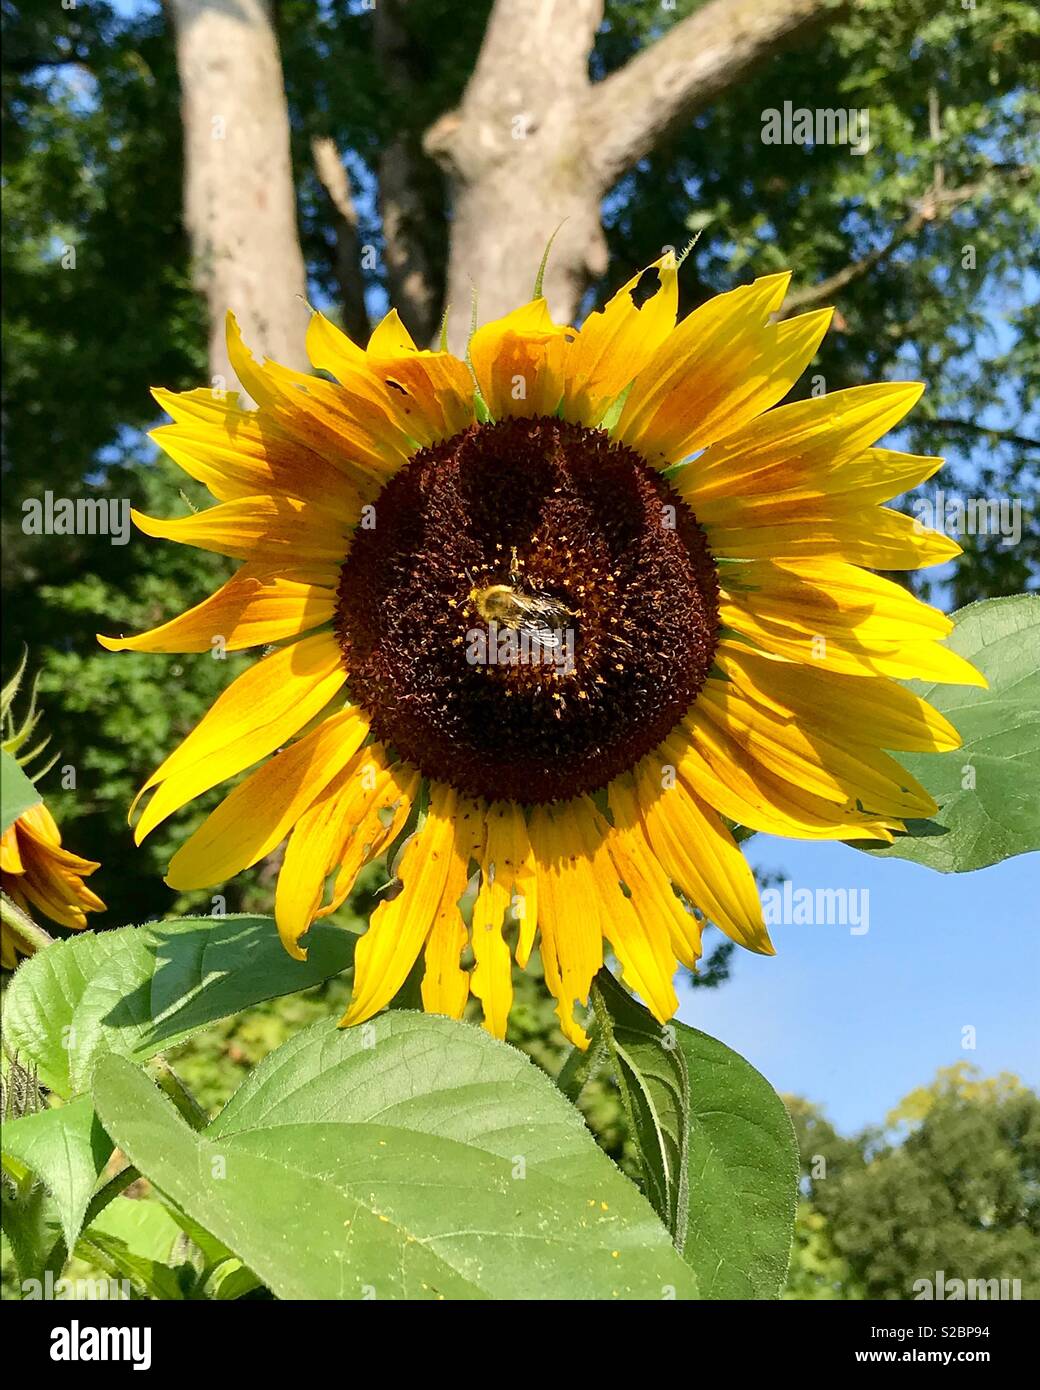 Bee on a sunflower head in bloom Stock Photo